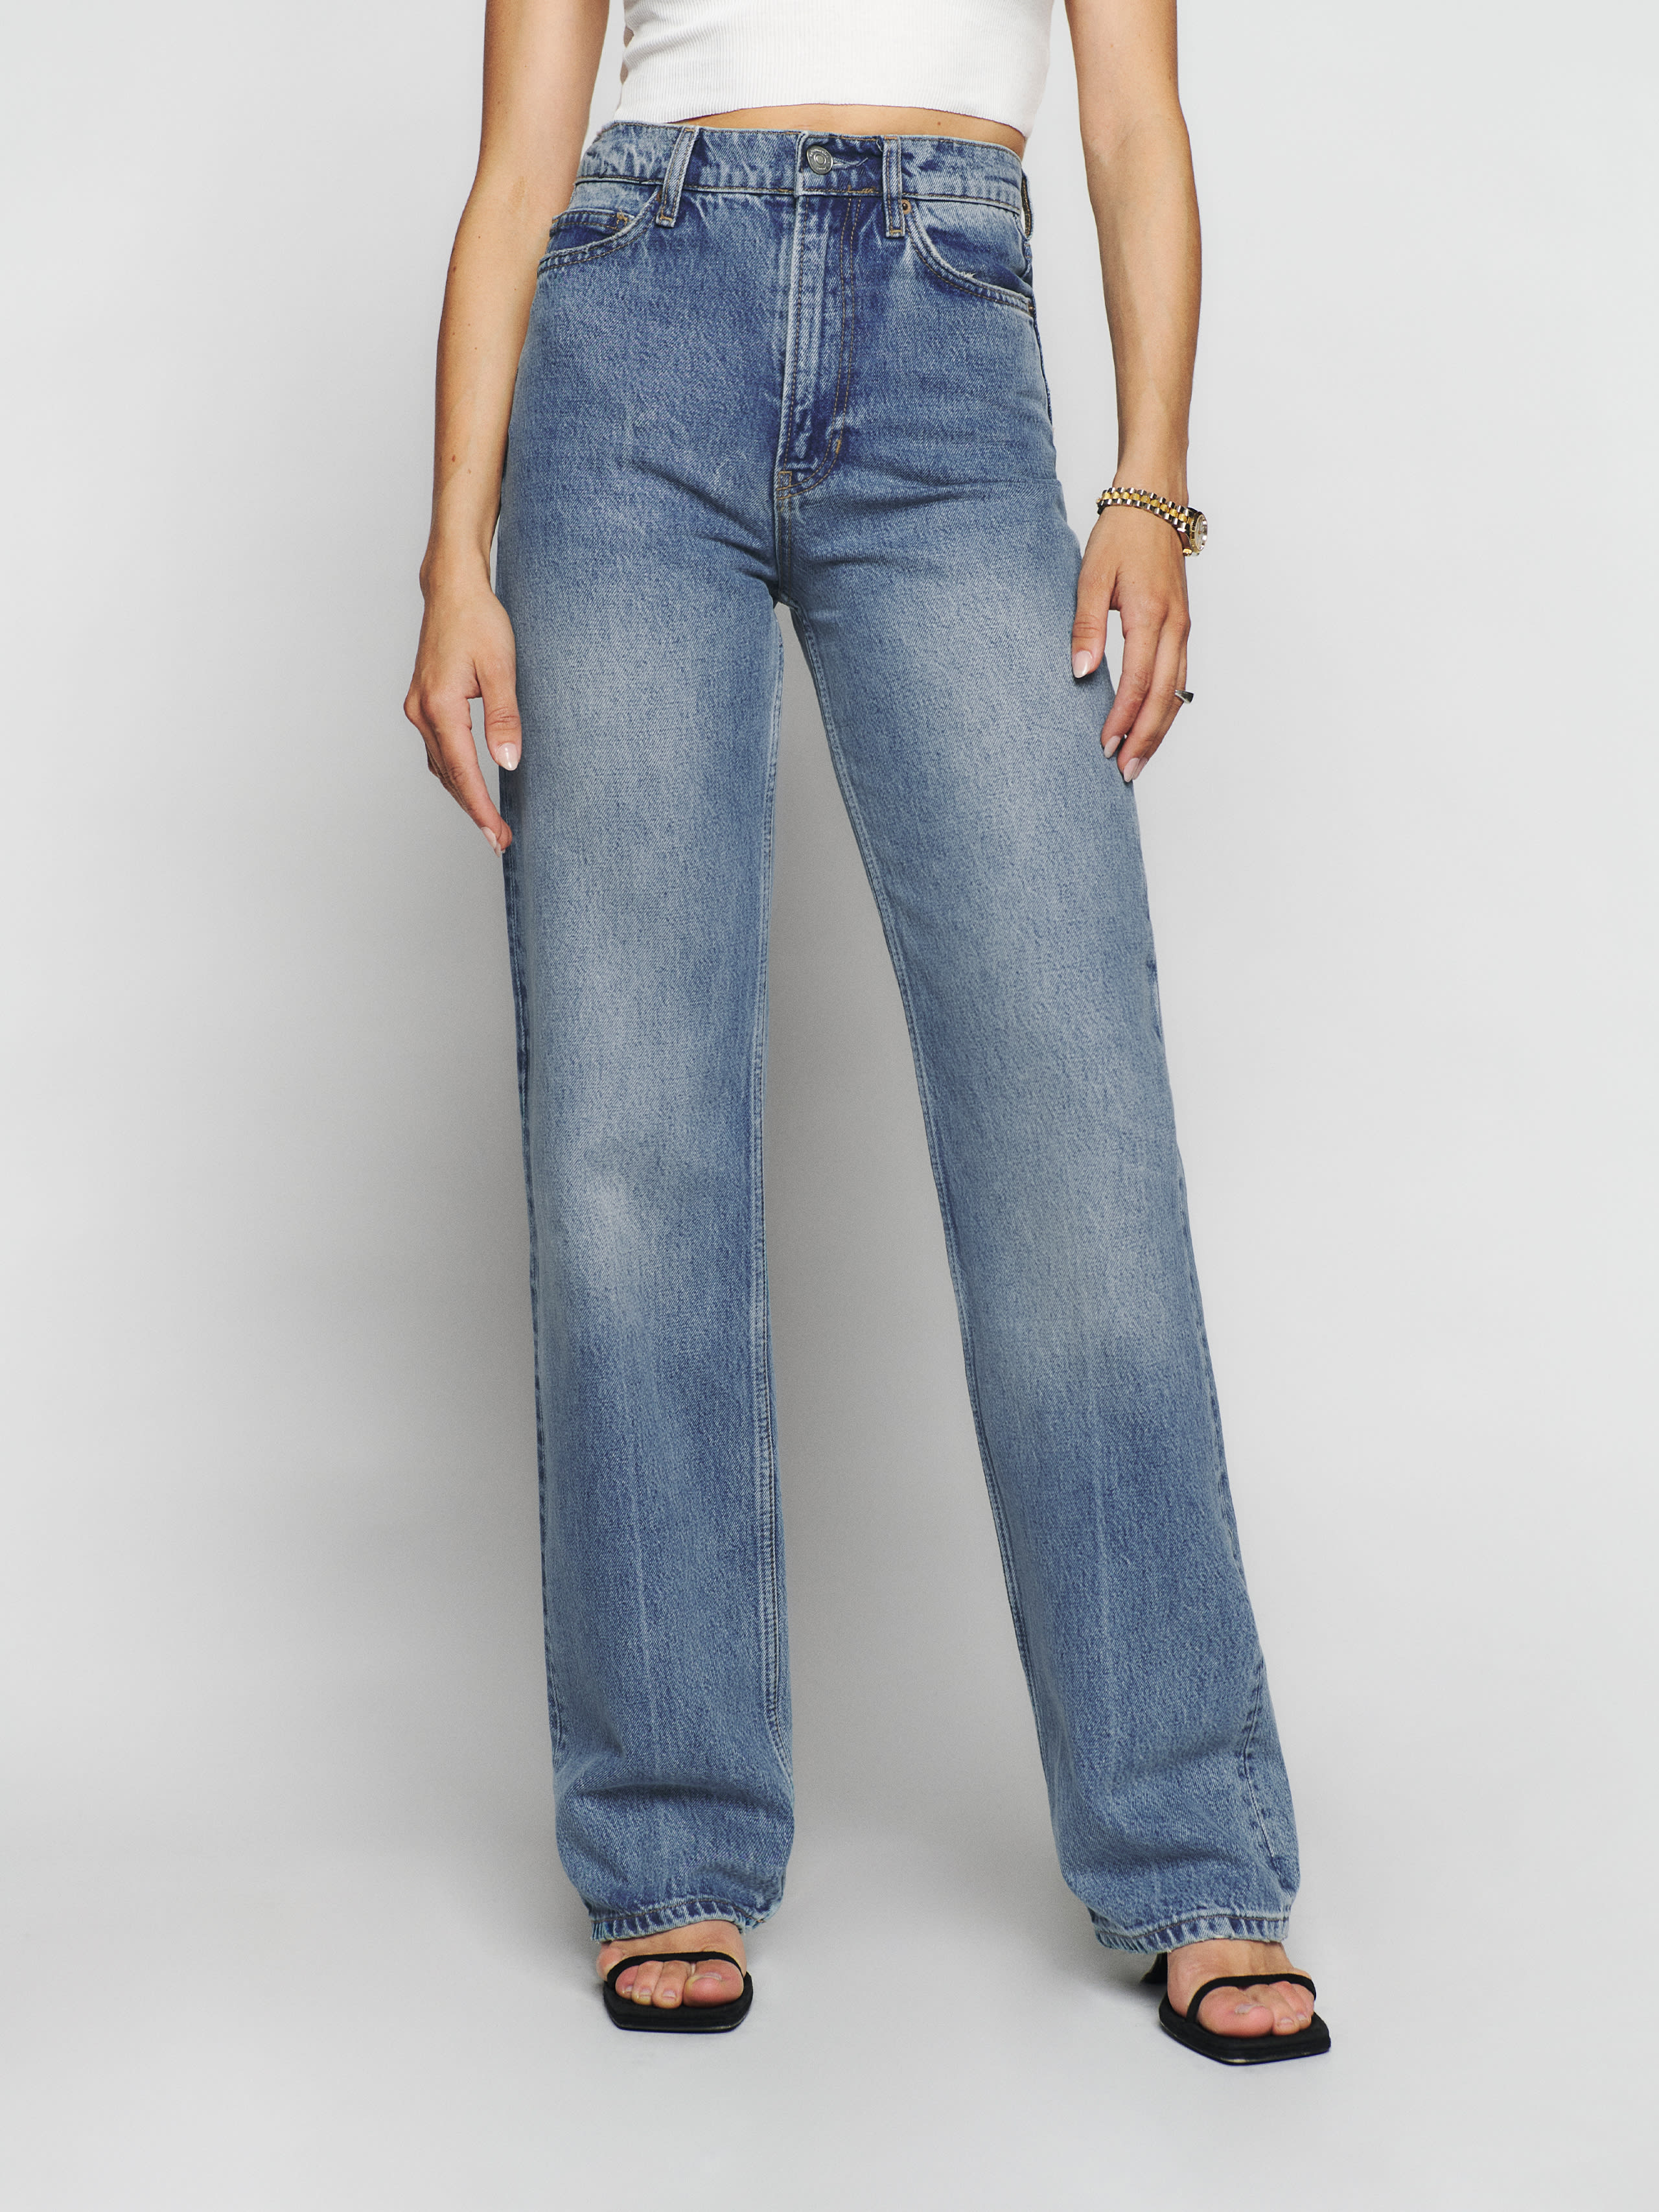 Wilder High Rise Wide Leg Jeans, image 1